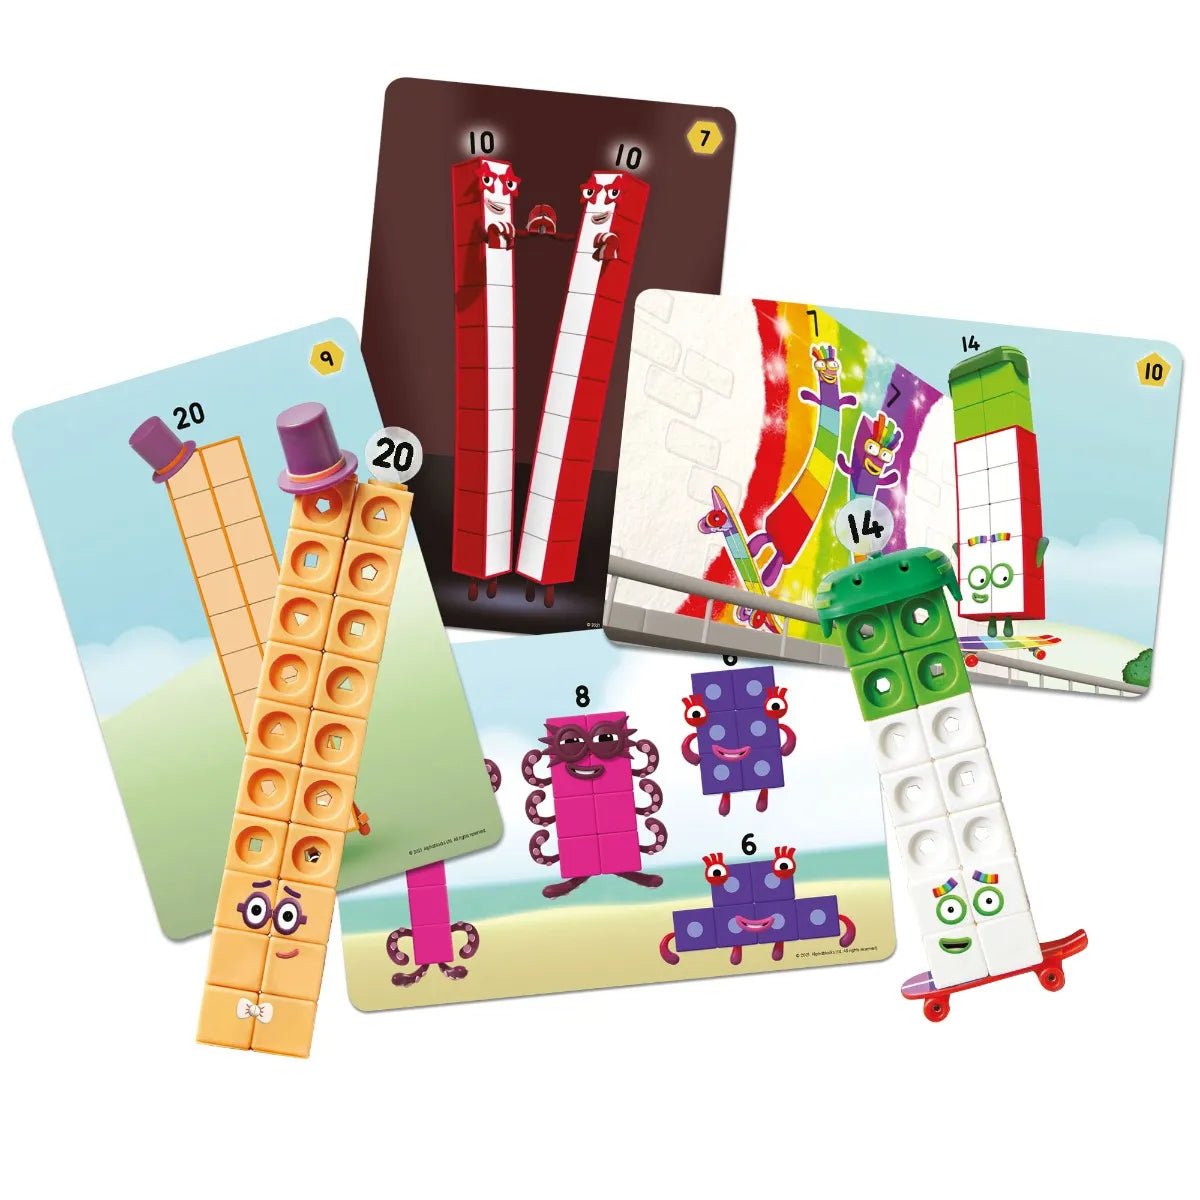 Learning Resources - Mathlink Cubes Numberblocks 11-20 - Playlaan